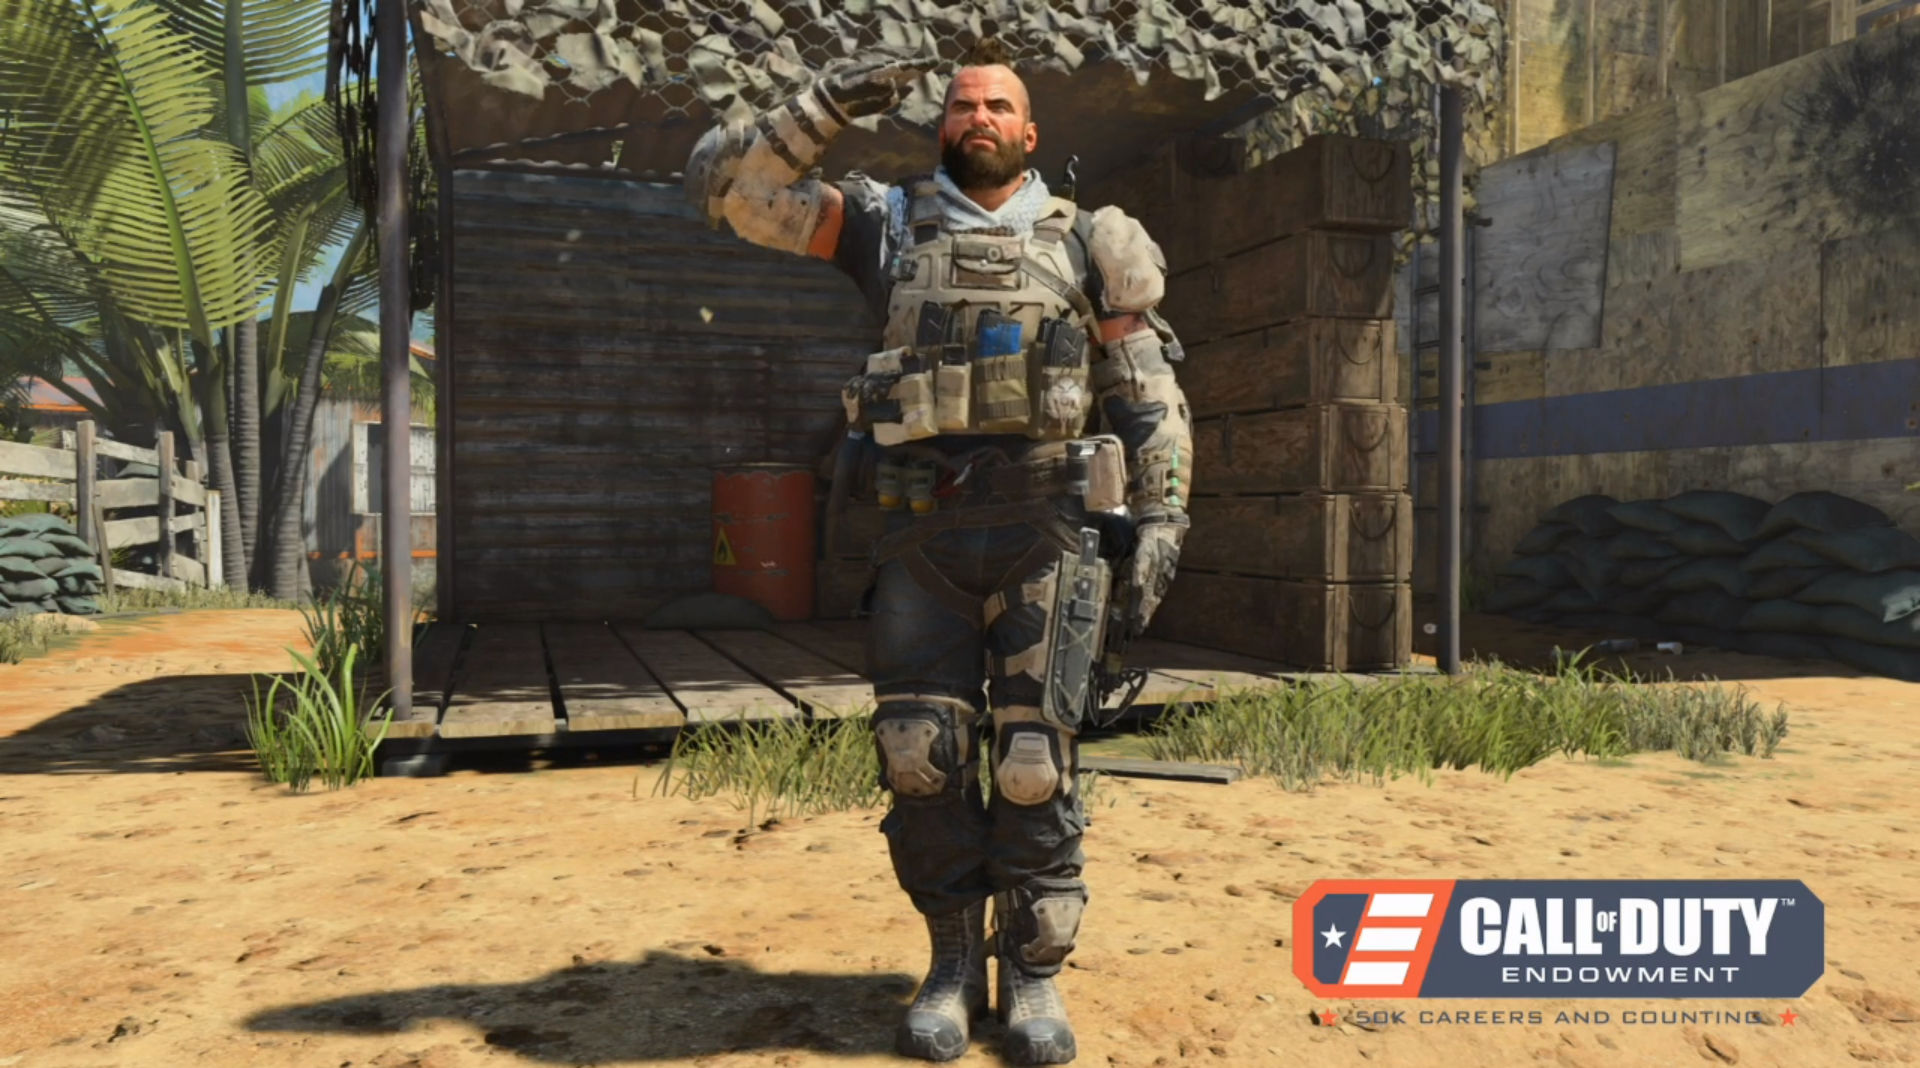 Call of duty: Black ops 4 salute Pack